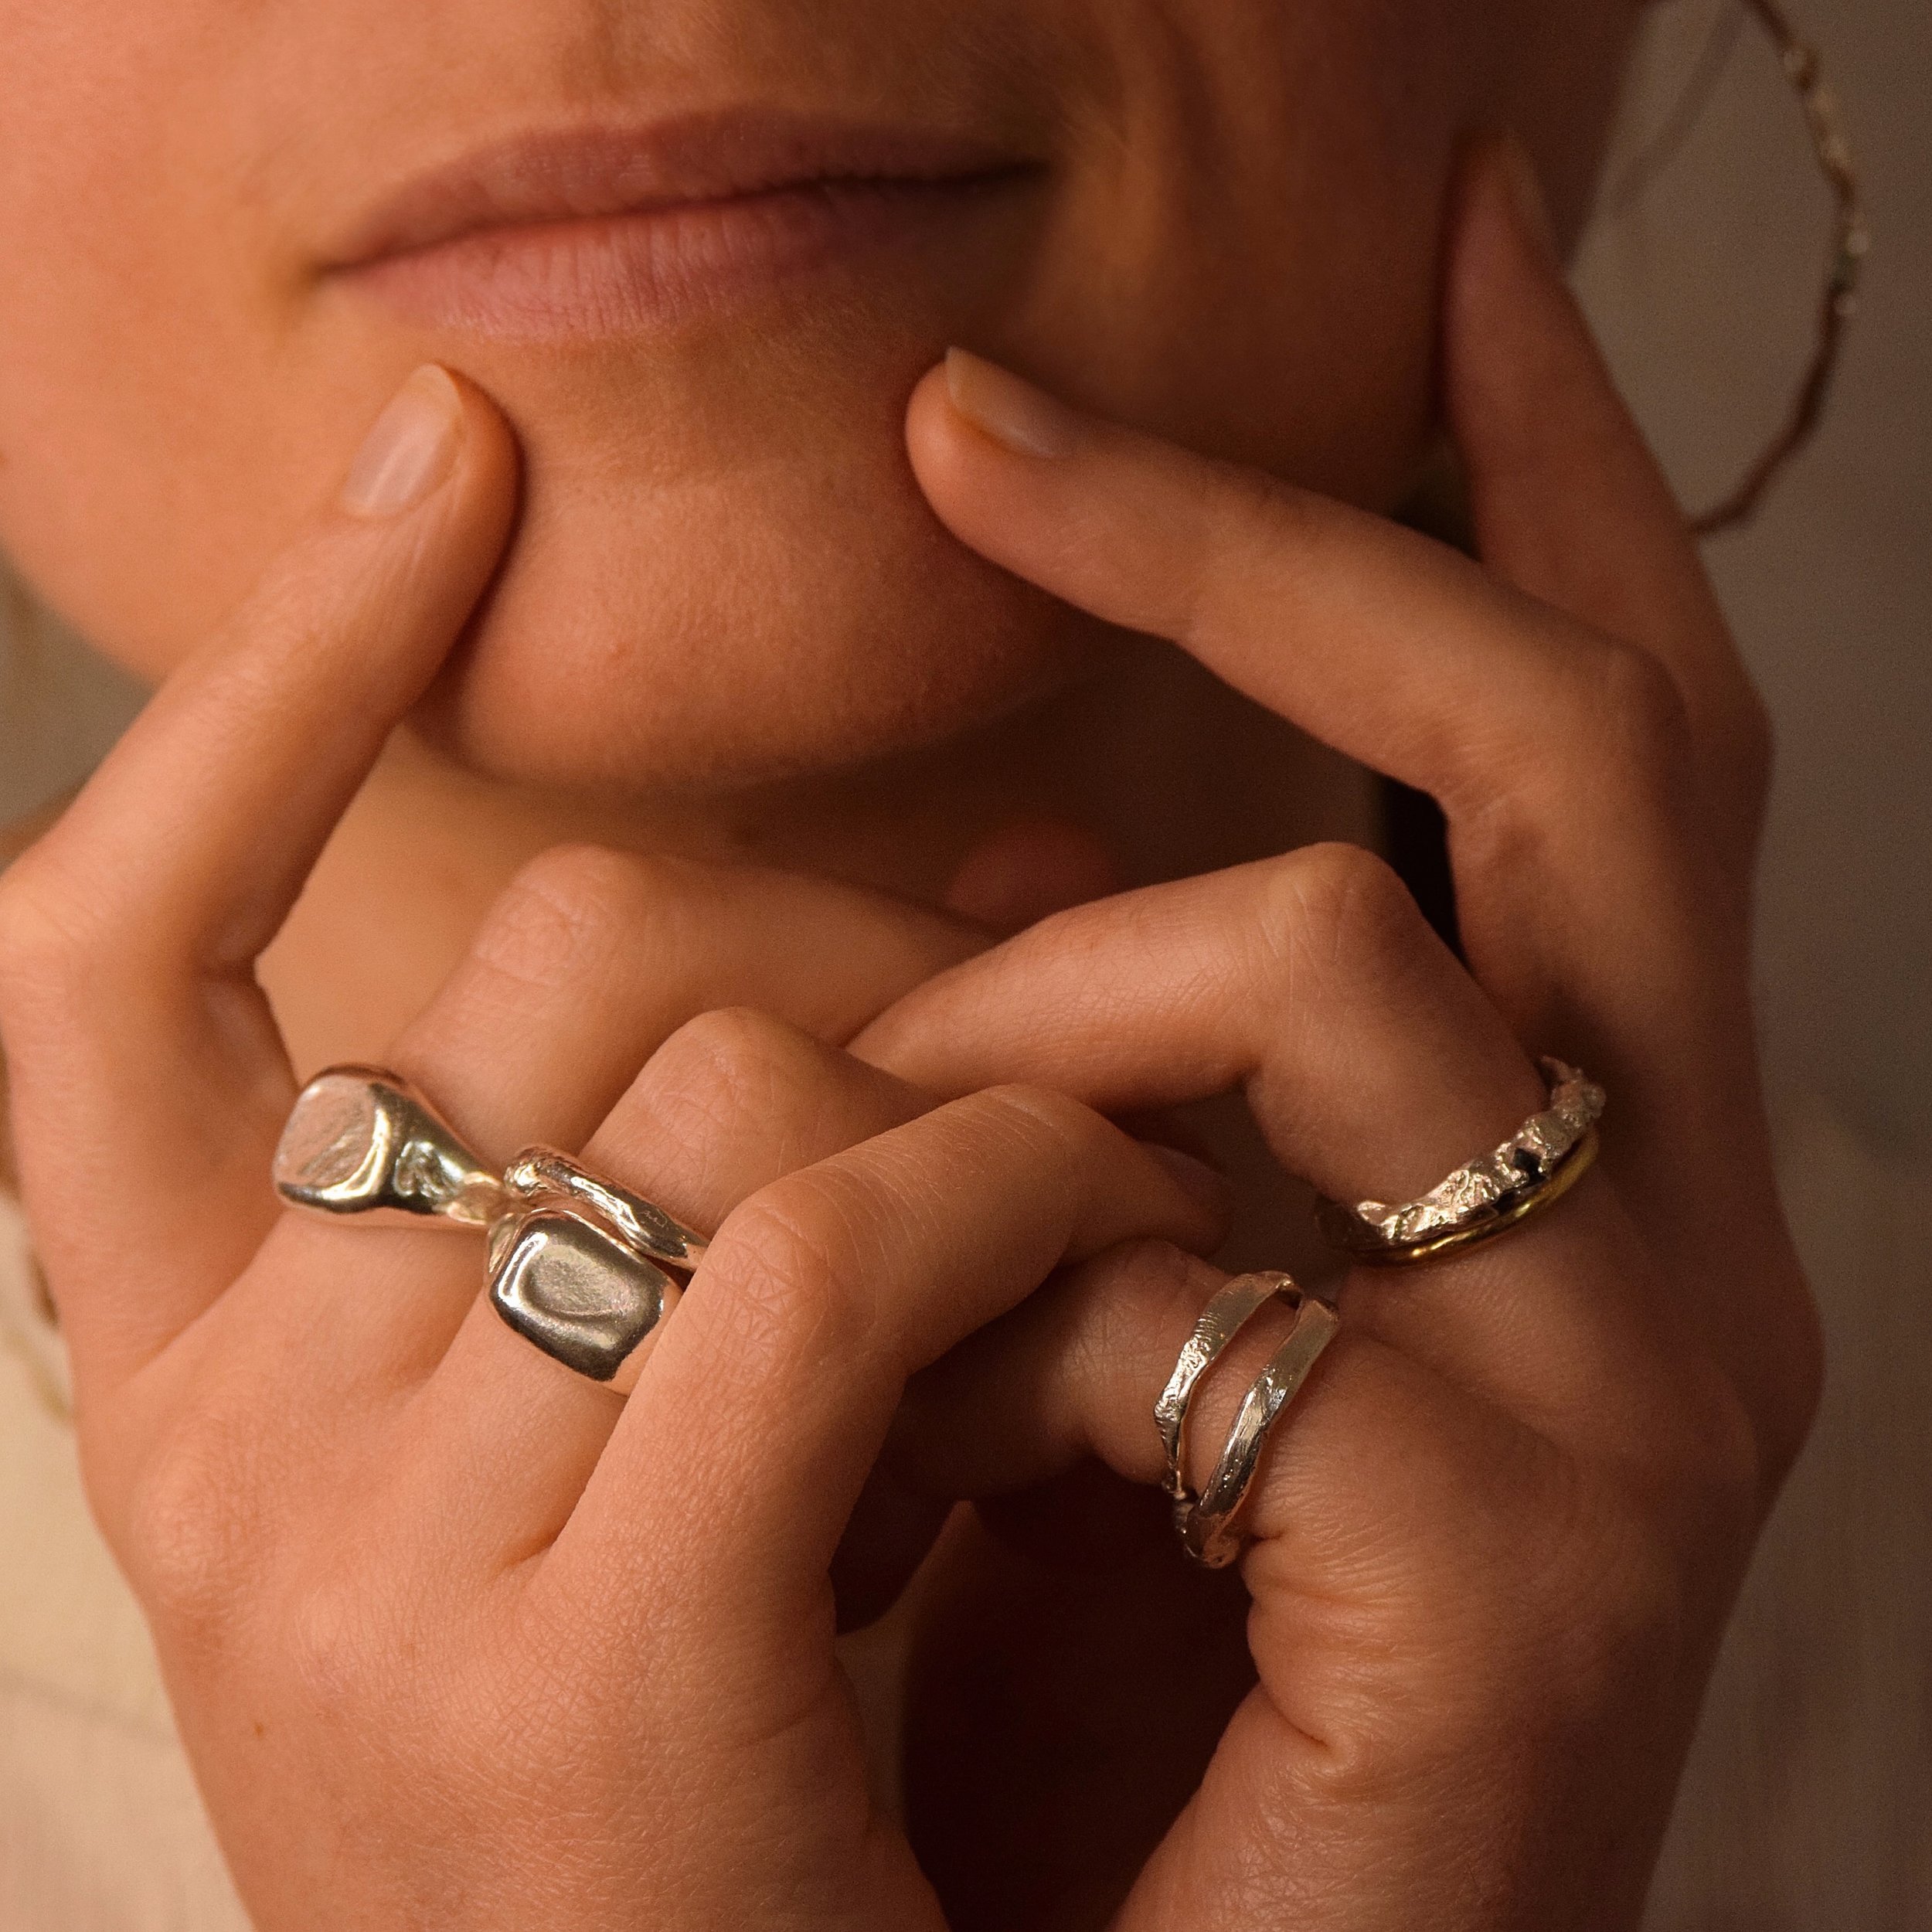 A delicious silver stack on a Monday ~

All handmade from 100% recycled silver or gold ⚒️

#sustainablejewellery #recycledsilver #handmadejewellery #silverring #chunkysilver #instajewellery #madeinlondon